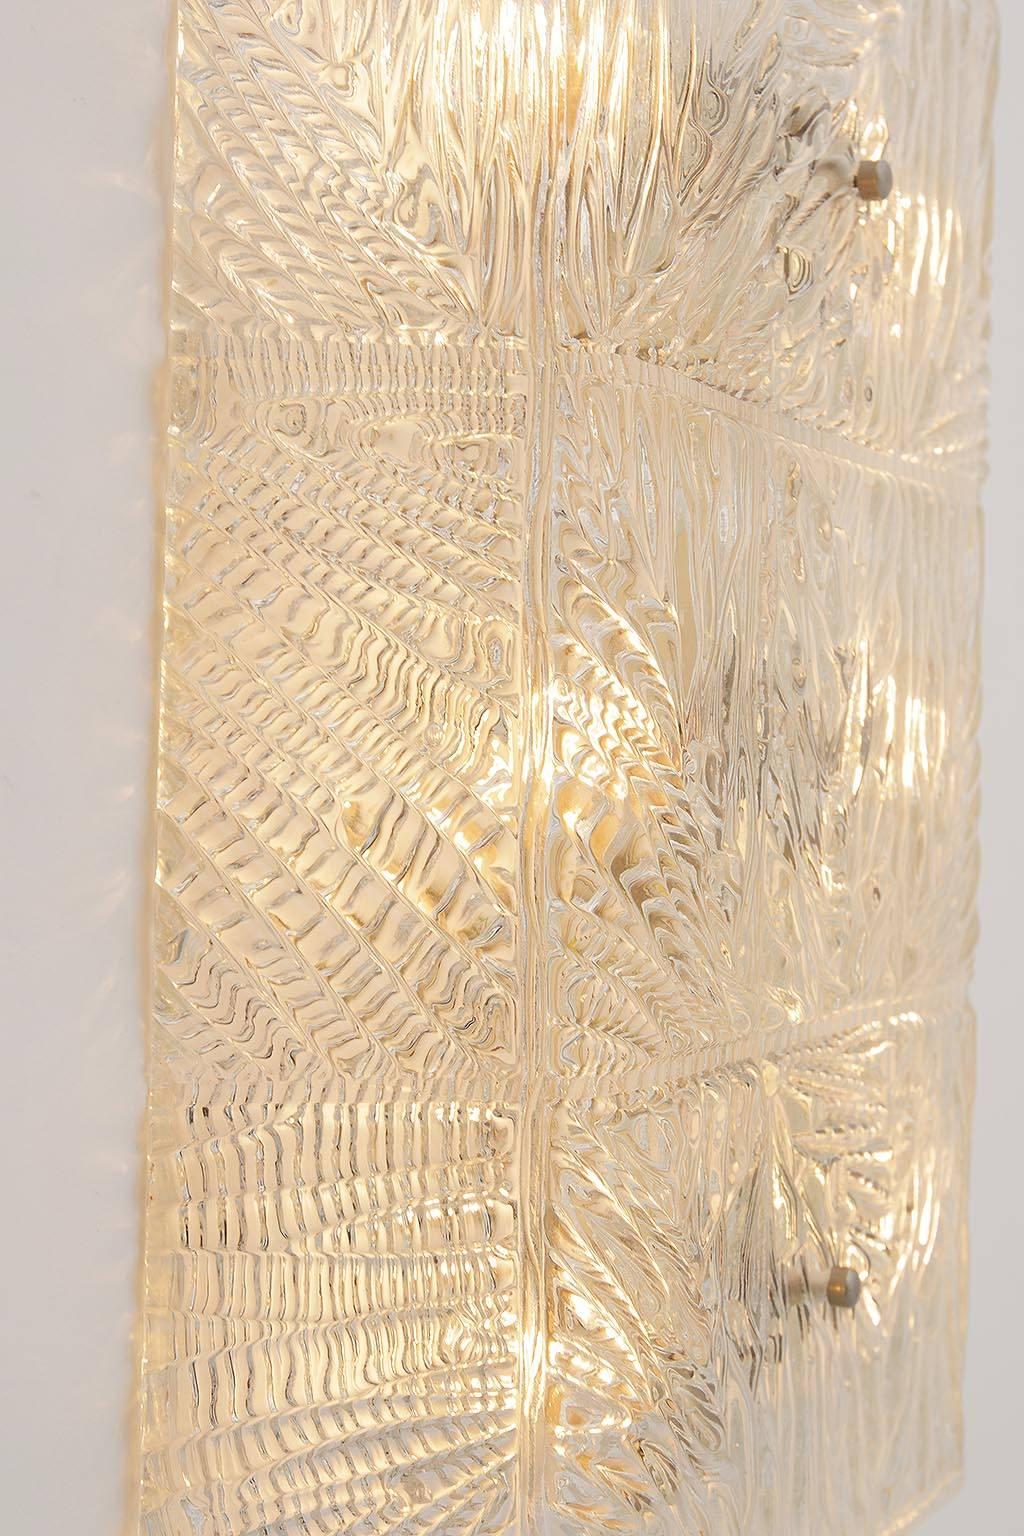 Large Textured Glass Sconce, Austria, 1950s For Sale 1